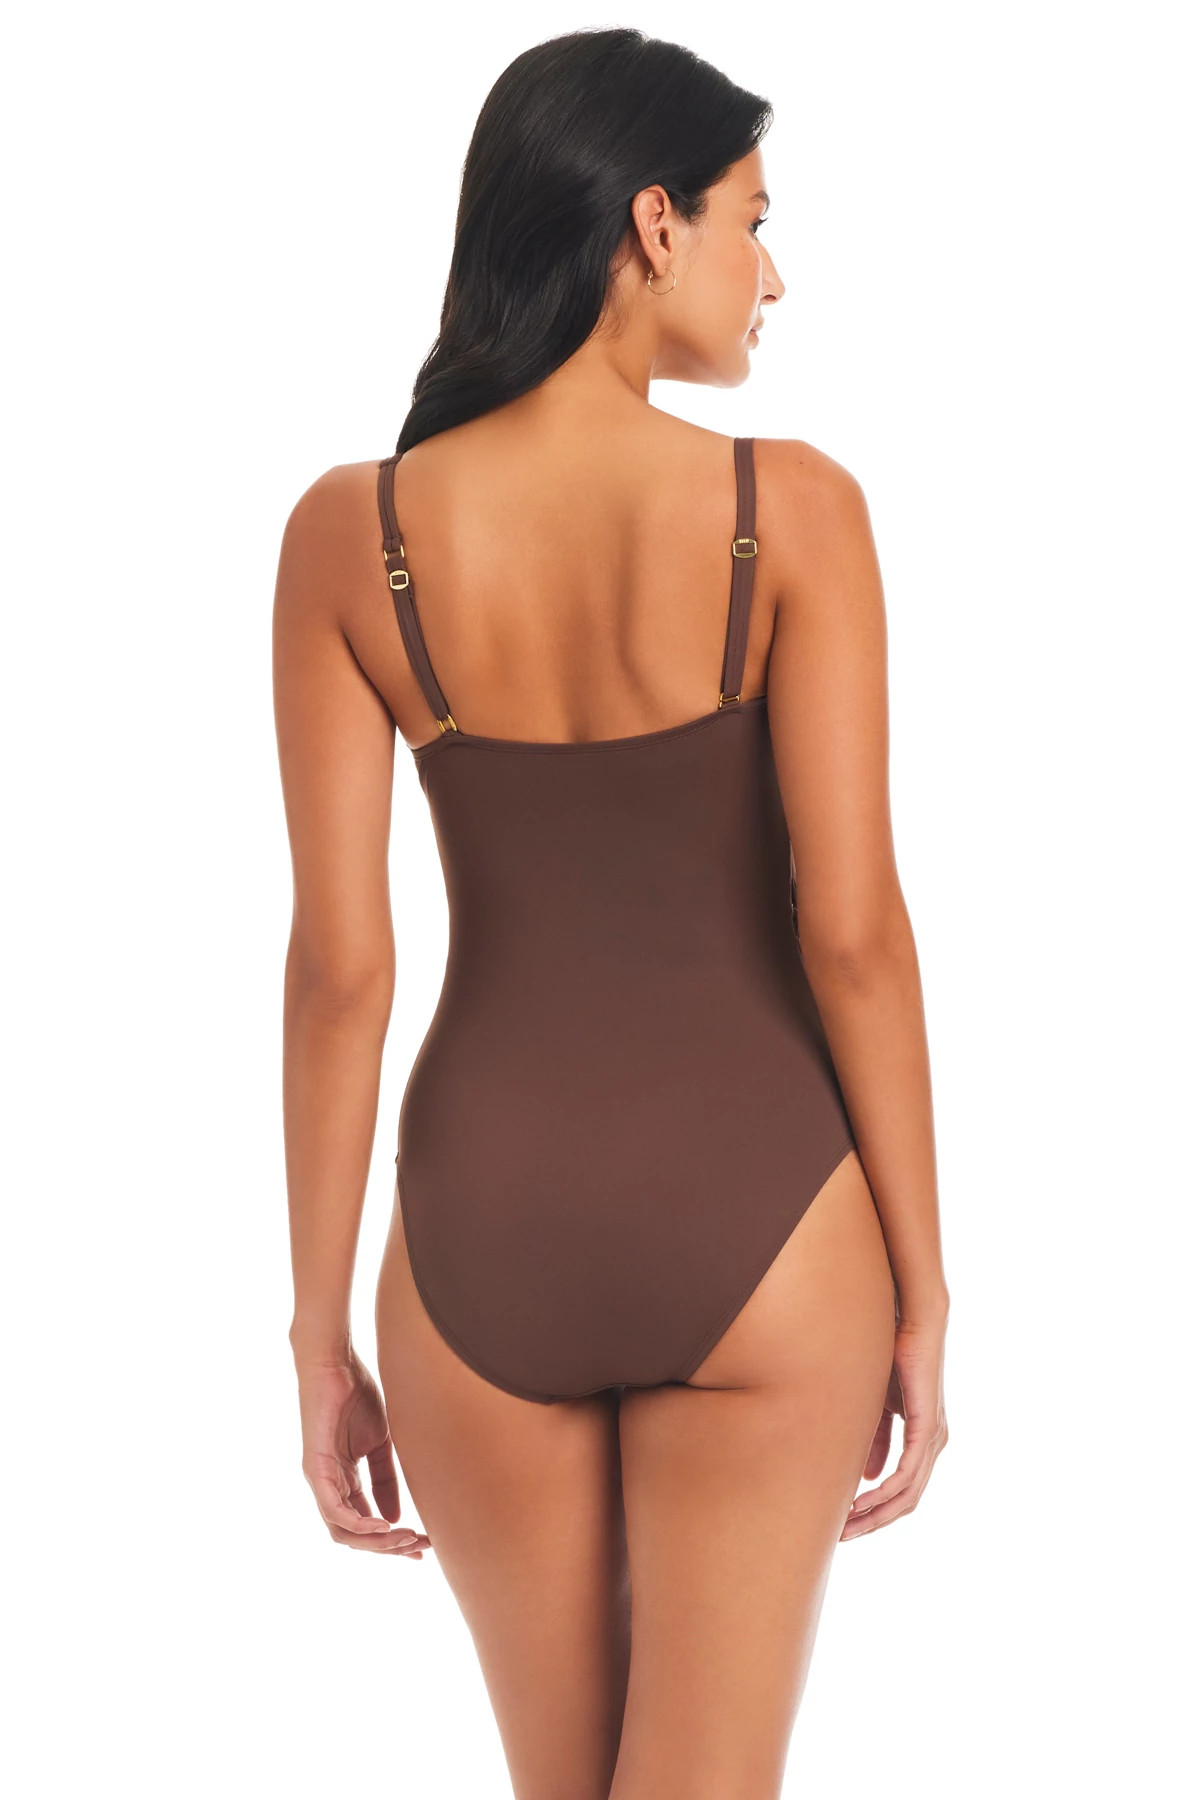 HICKORY Knotted Asymmetrical One Piece Swimsuit image number 4